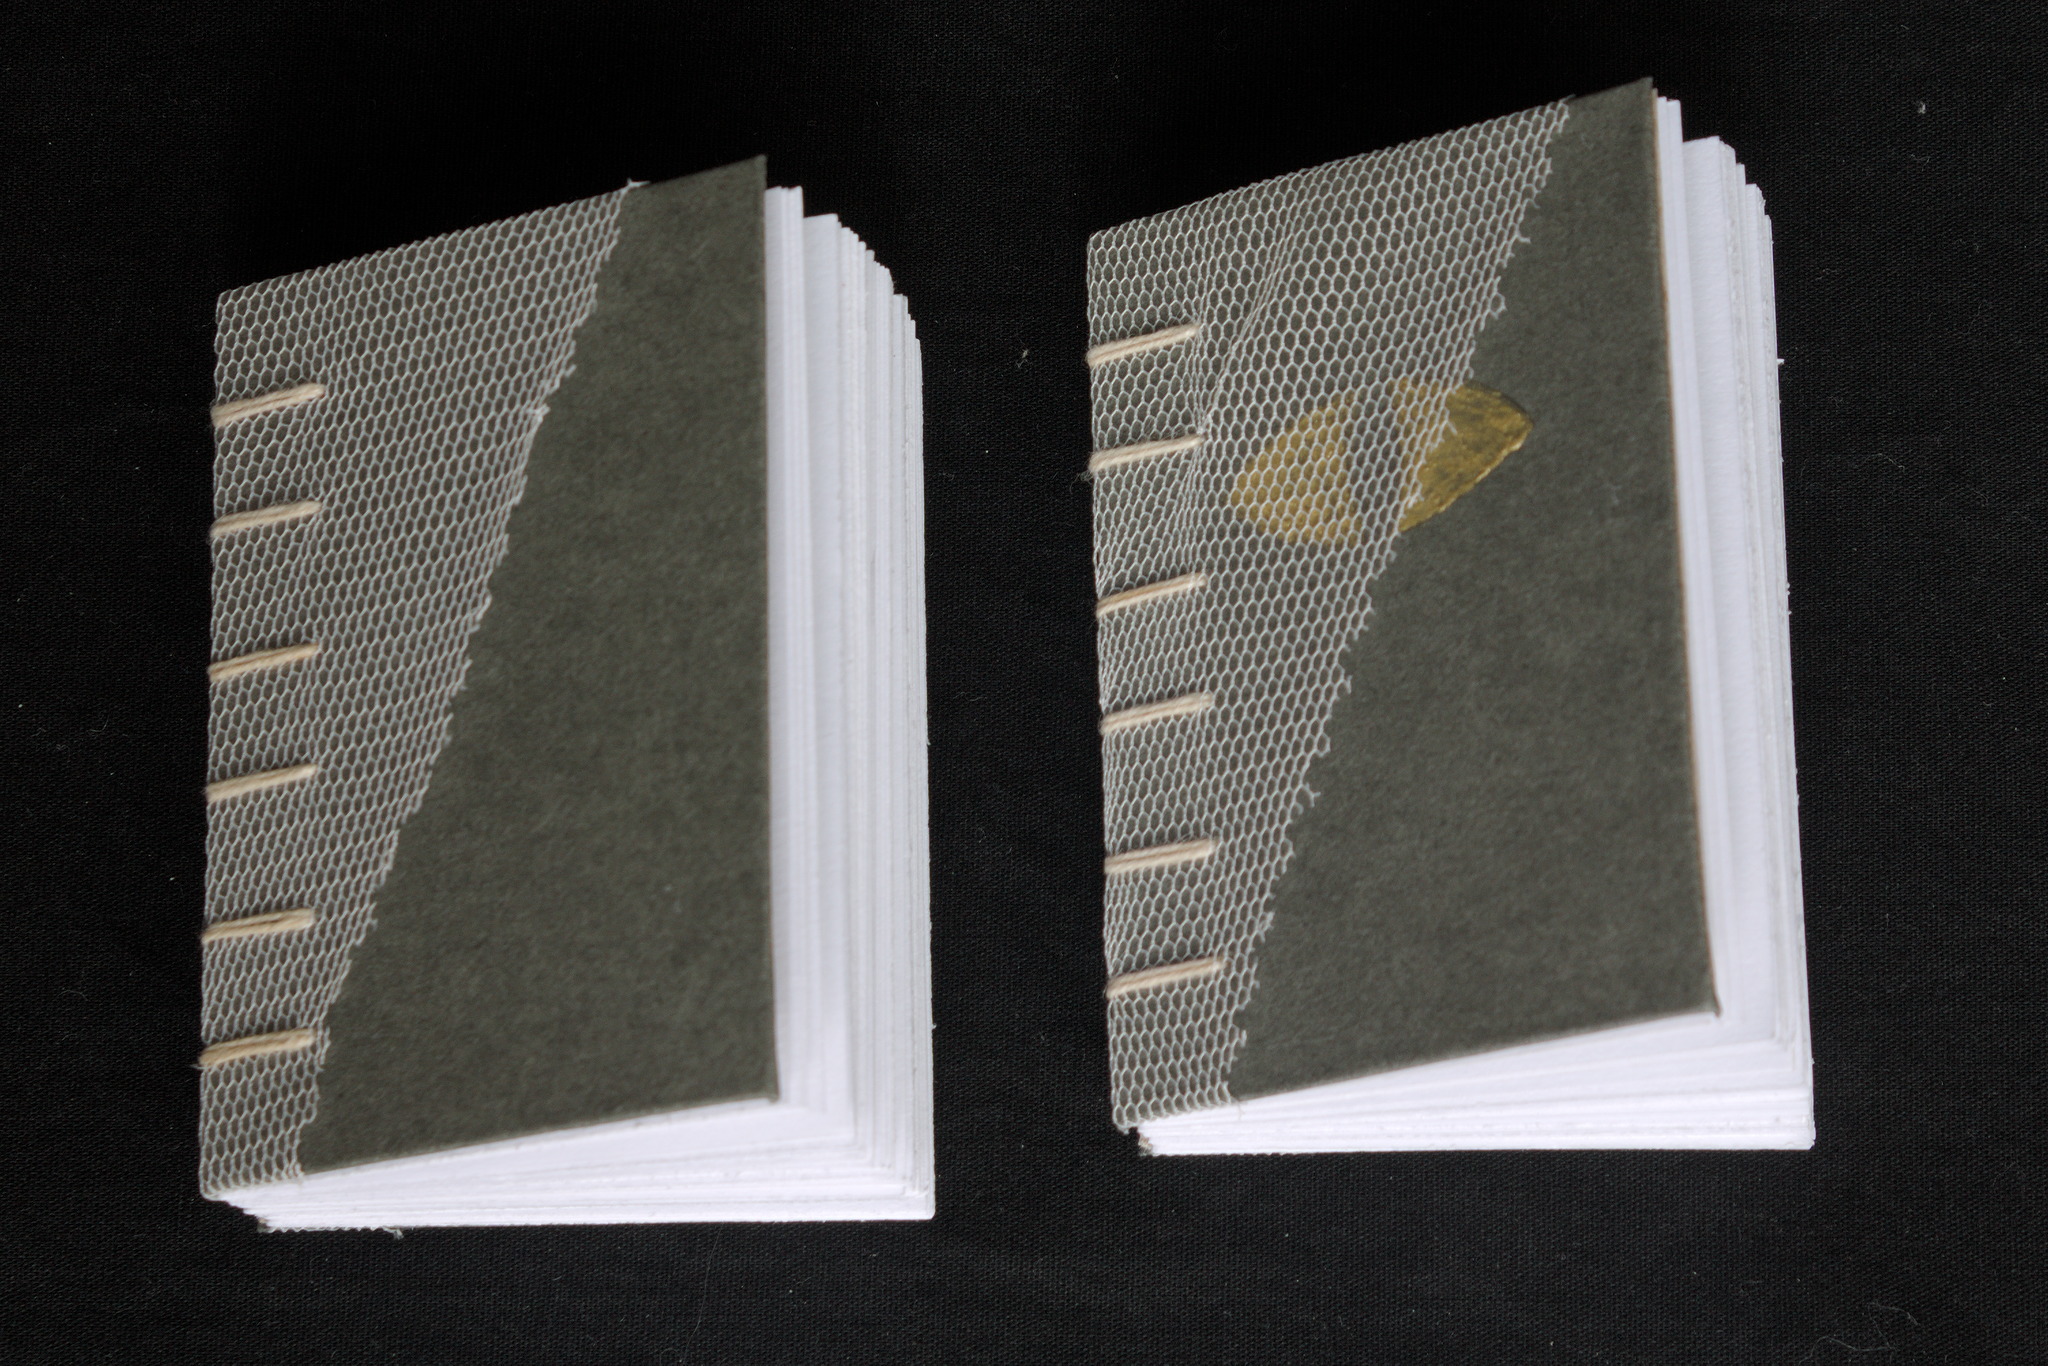 Two coptic bound small books, seen from the front. The covers
are covered in grey paper, and they are half-covered by a piece of
off-white tulle, cut on a diagonal. One of the two books has a cat
eye embossed and painted in gold.